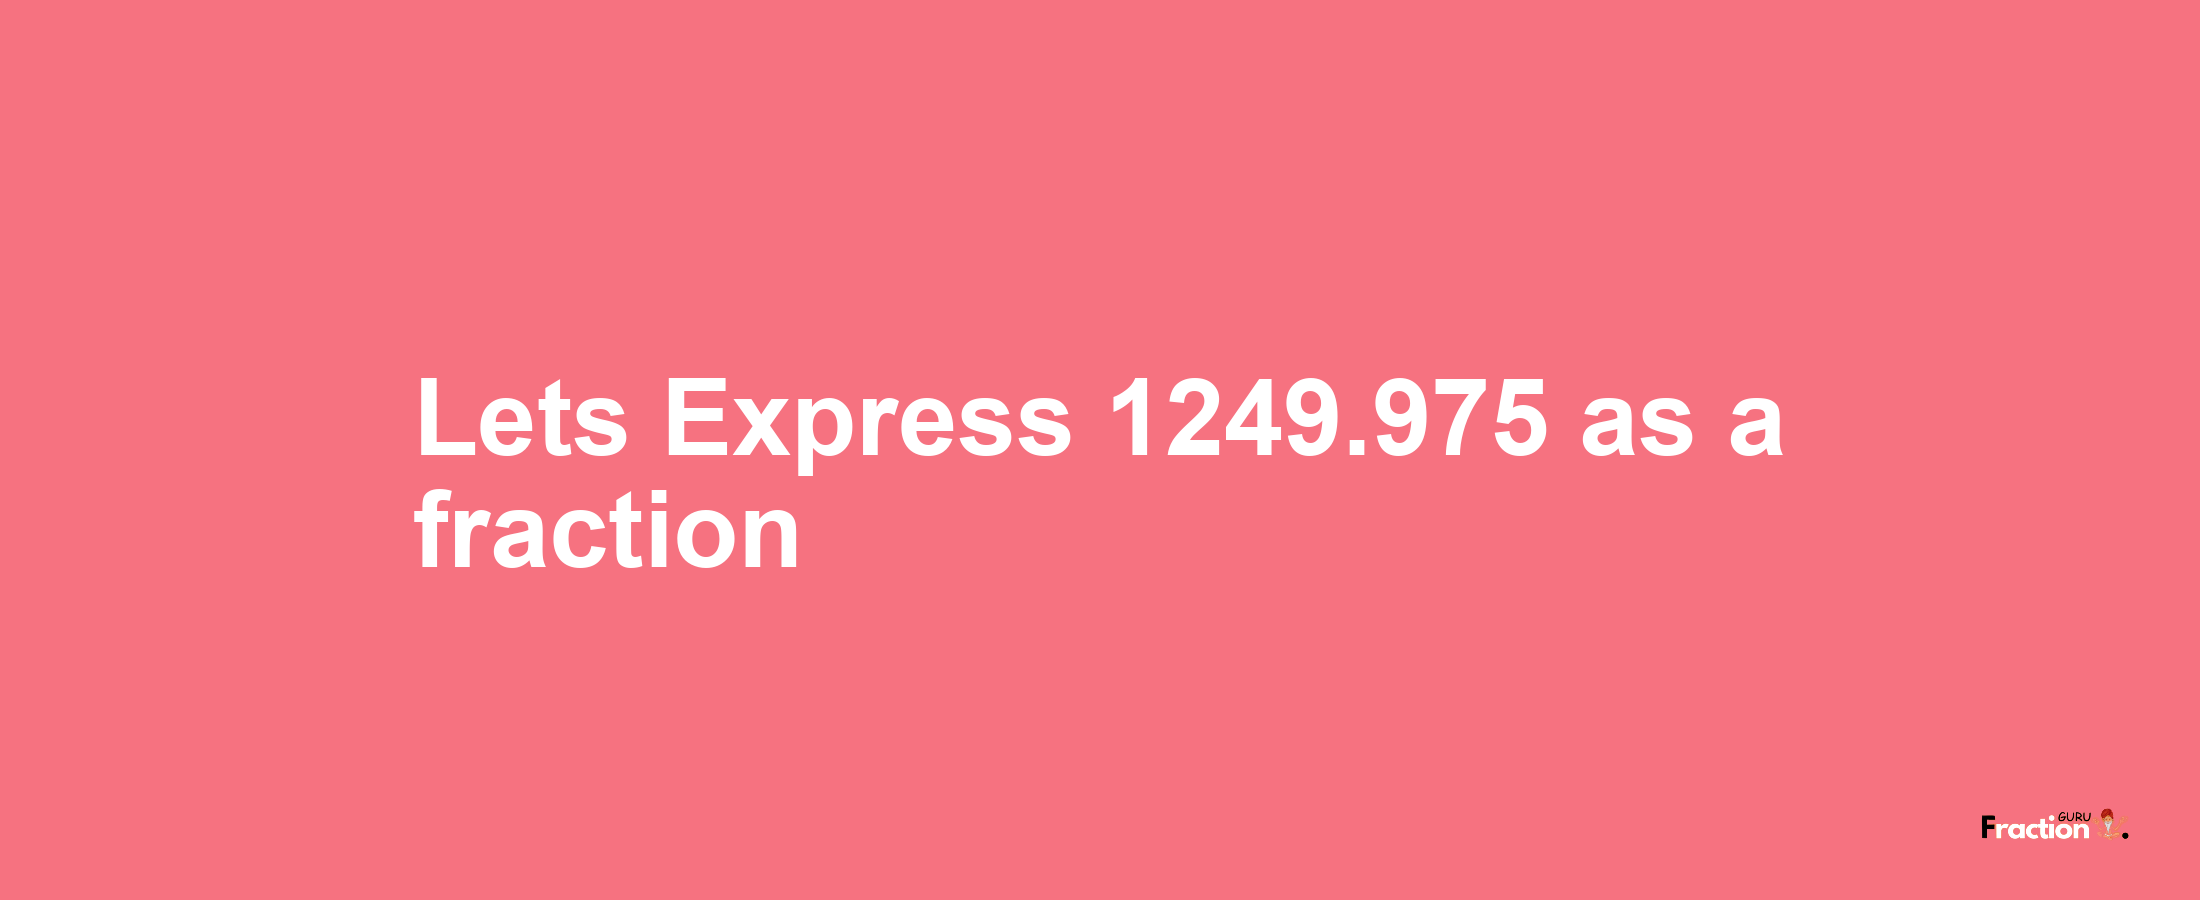 Lets Express 1249.975 as afraction